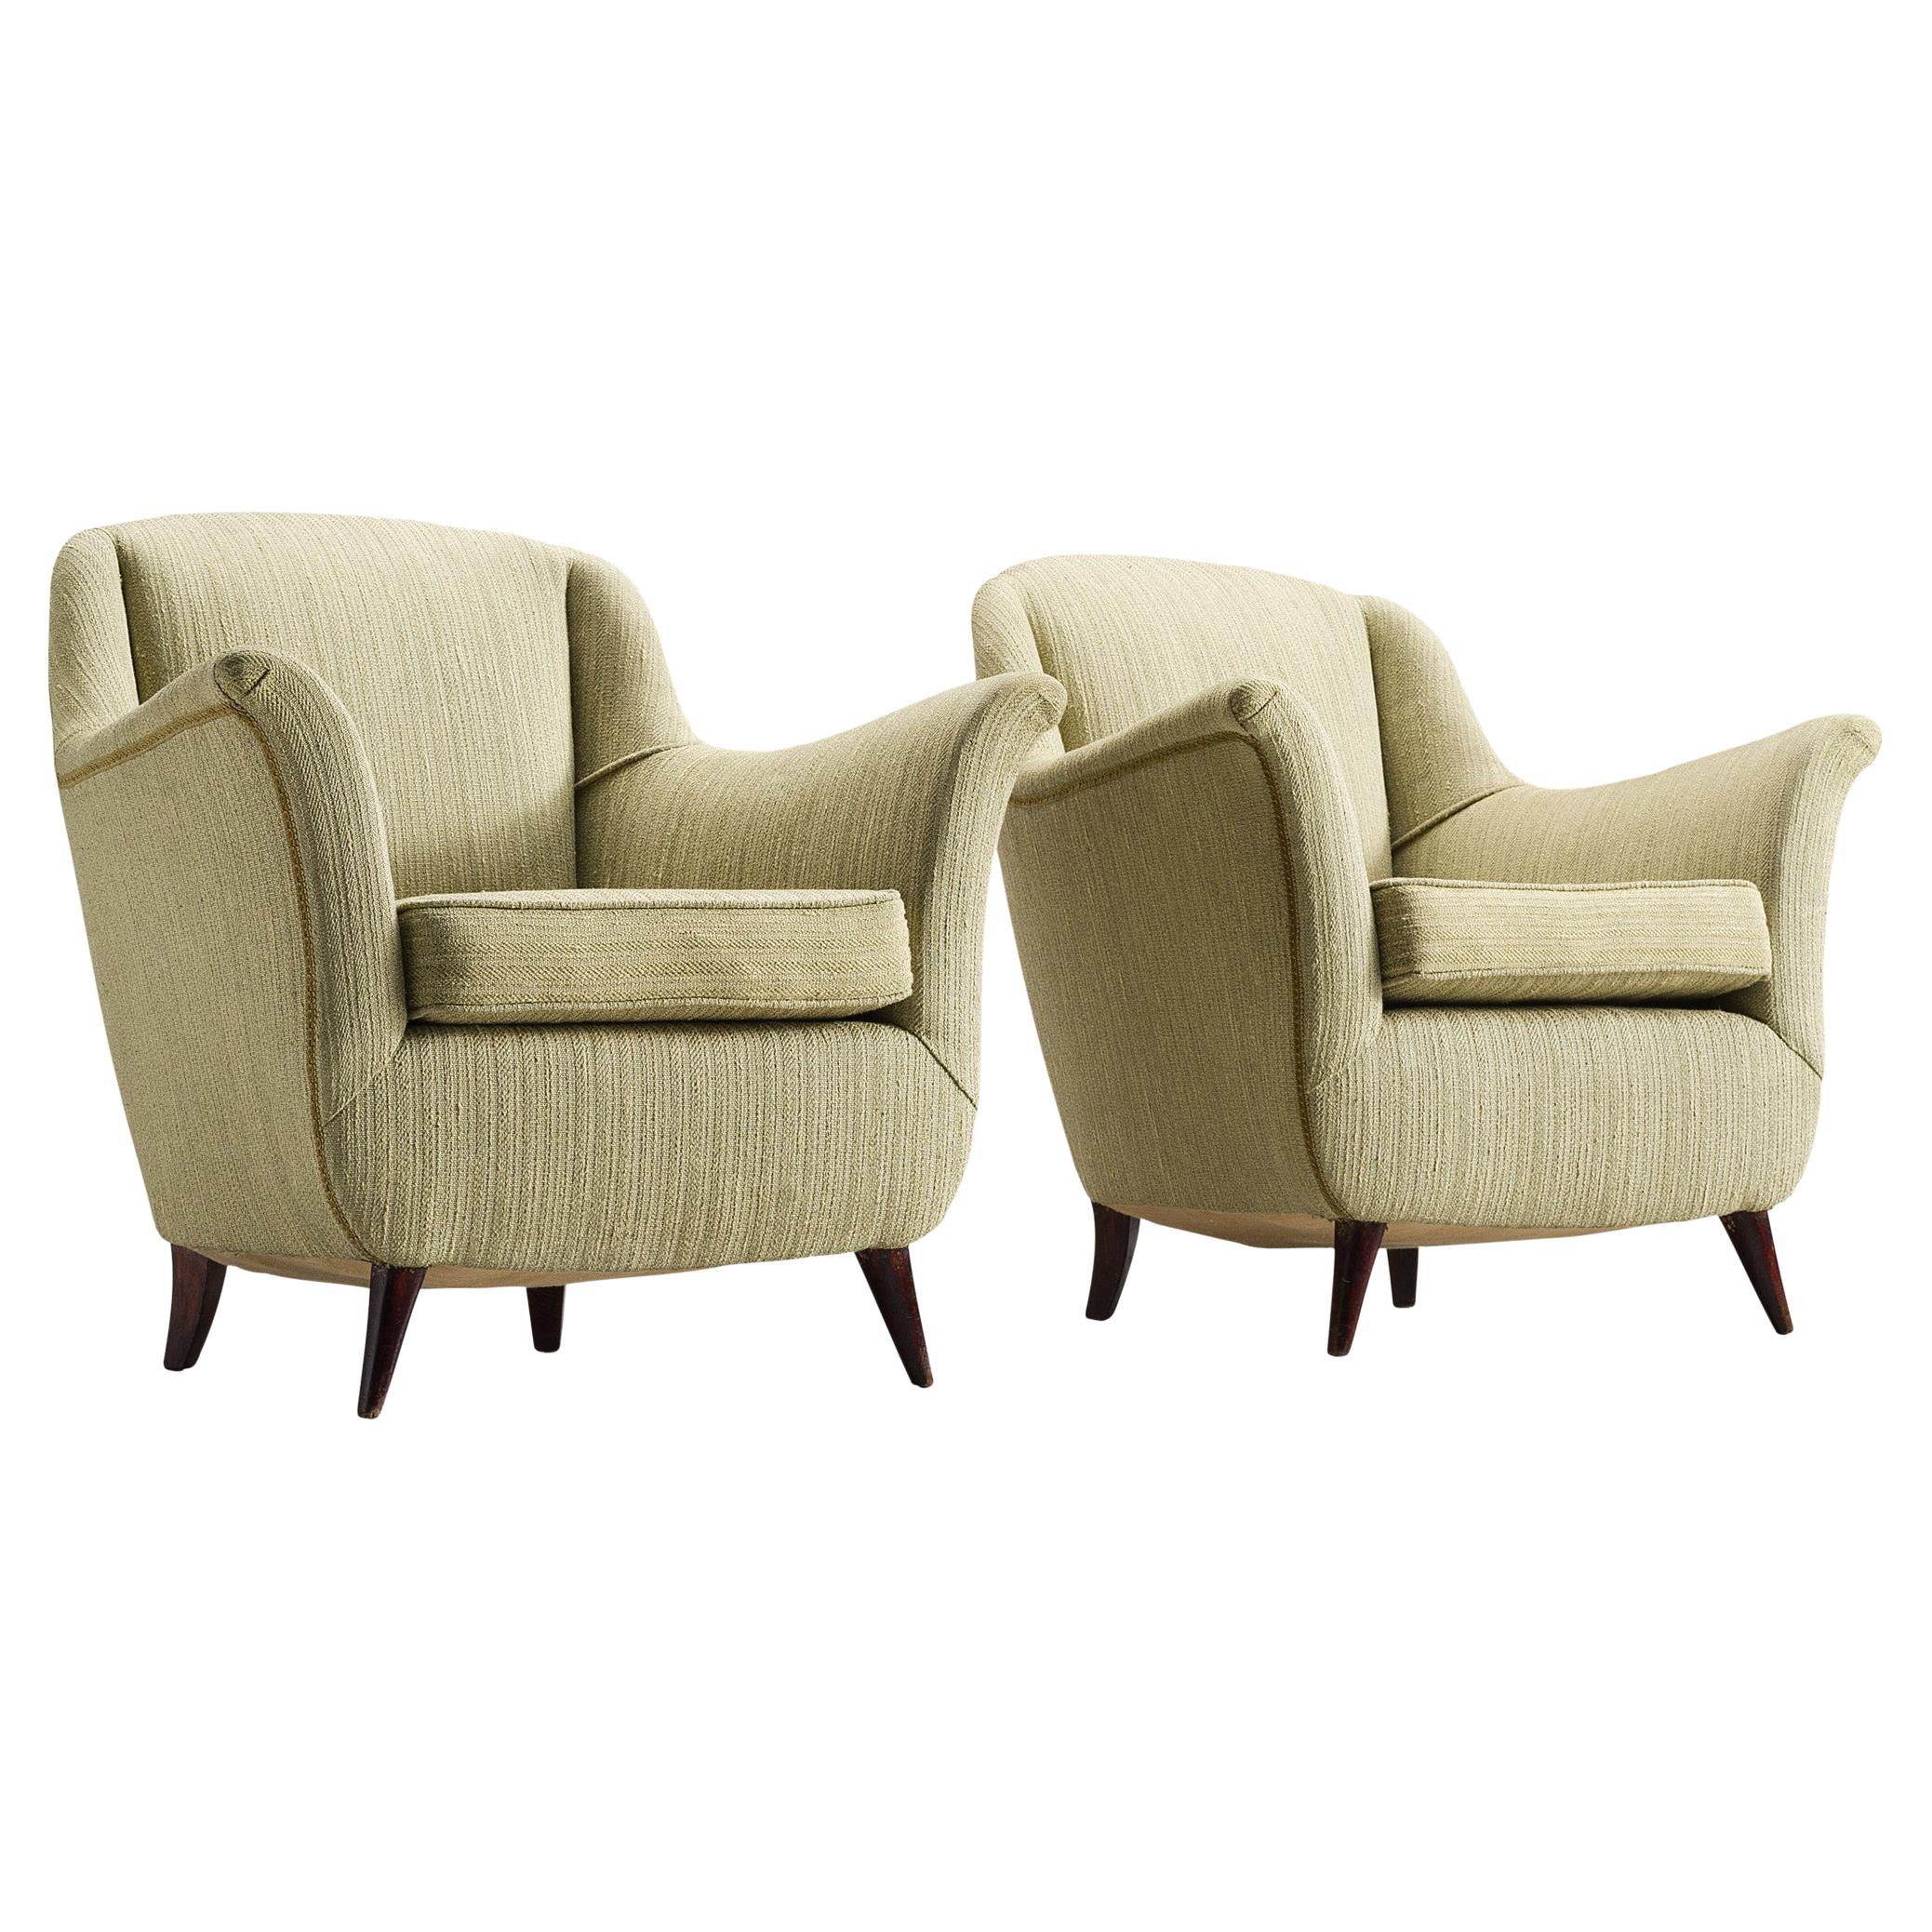 Pair of Italian Lounge Chairs in Soft Green Upholstery